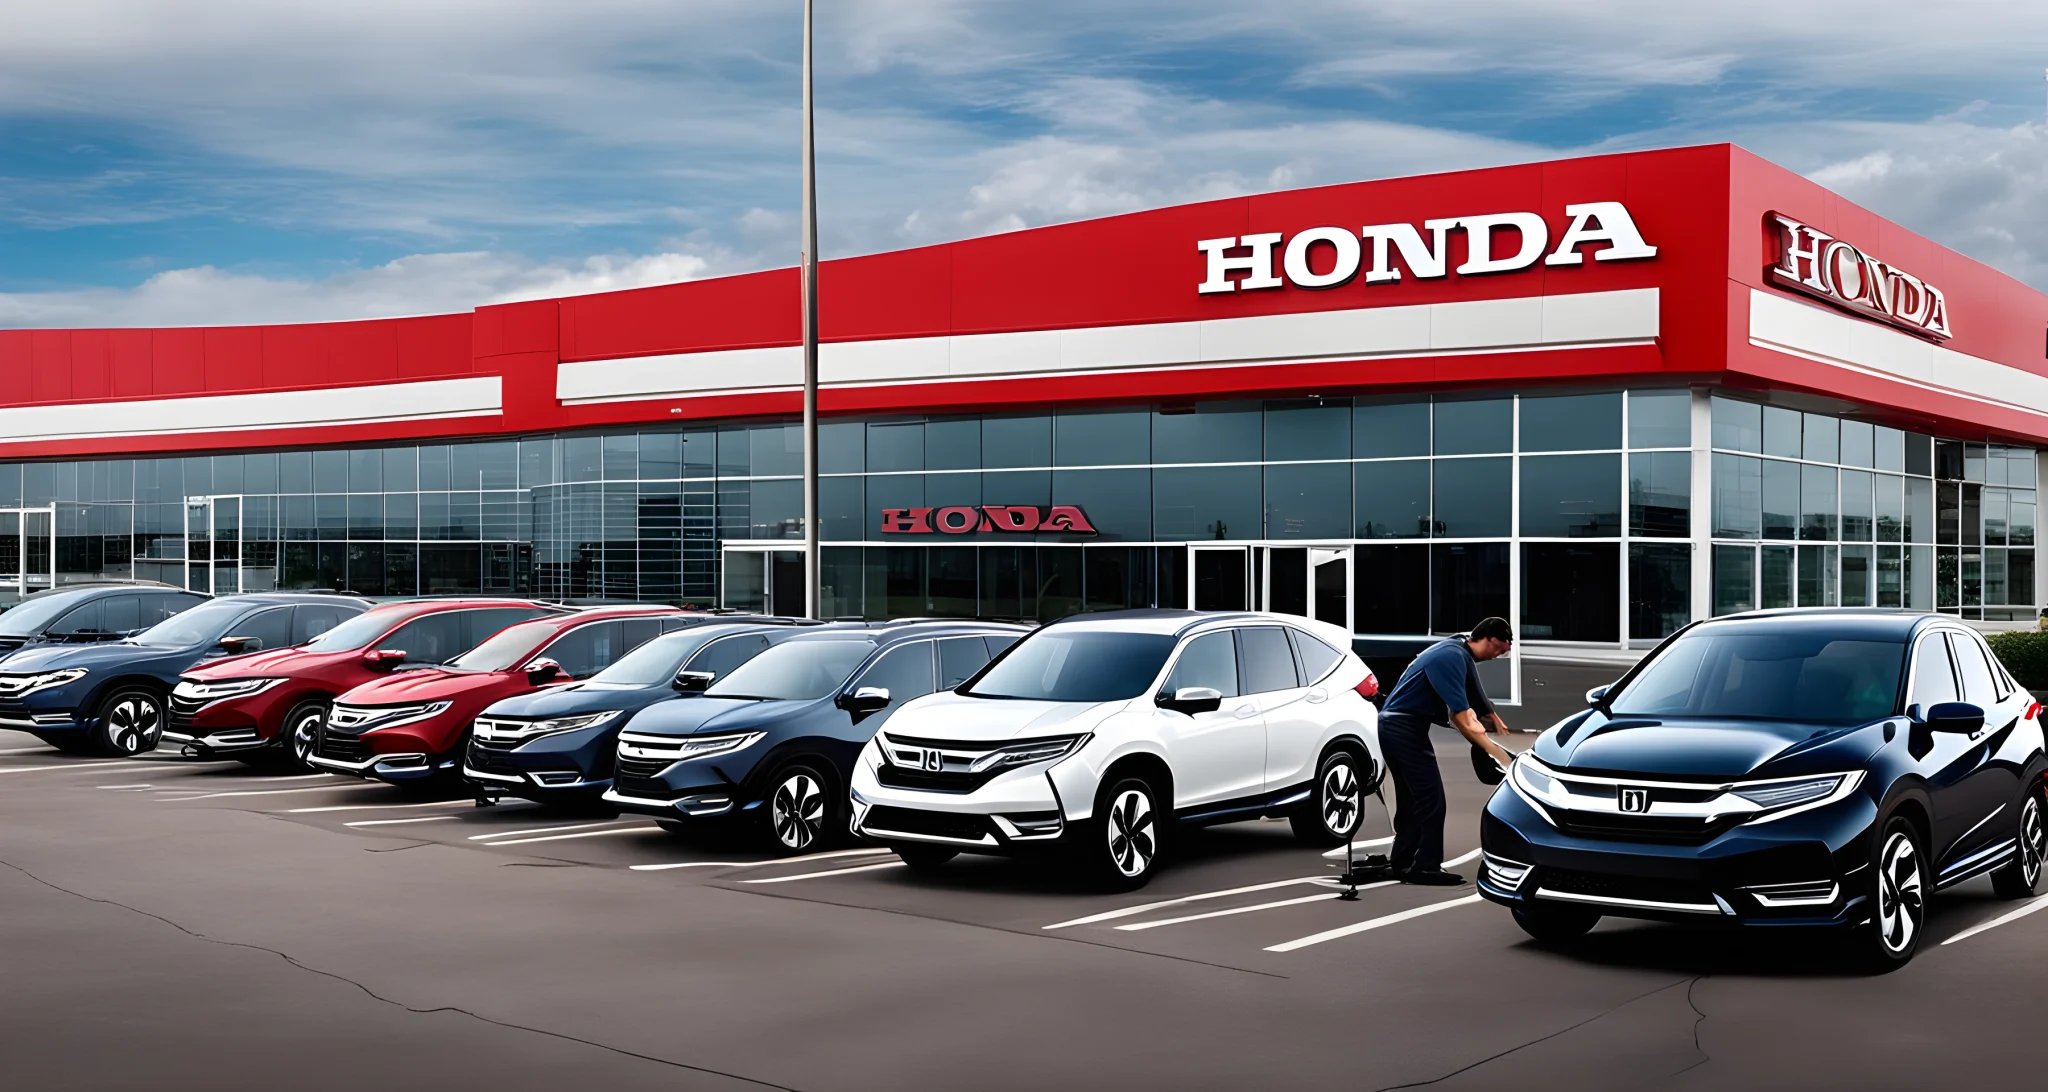 The image shows a Honda dealership sign, a row of new Honda vehicles, and a service center with technicians working on cars.